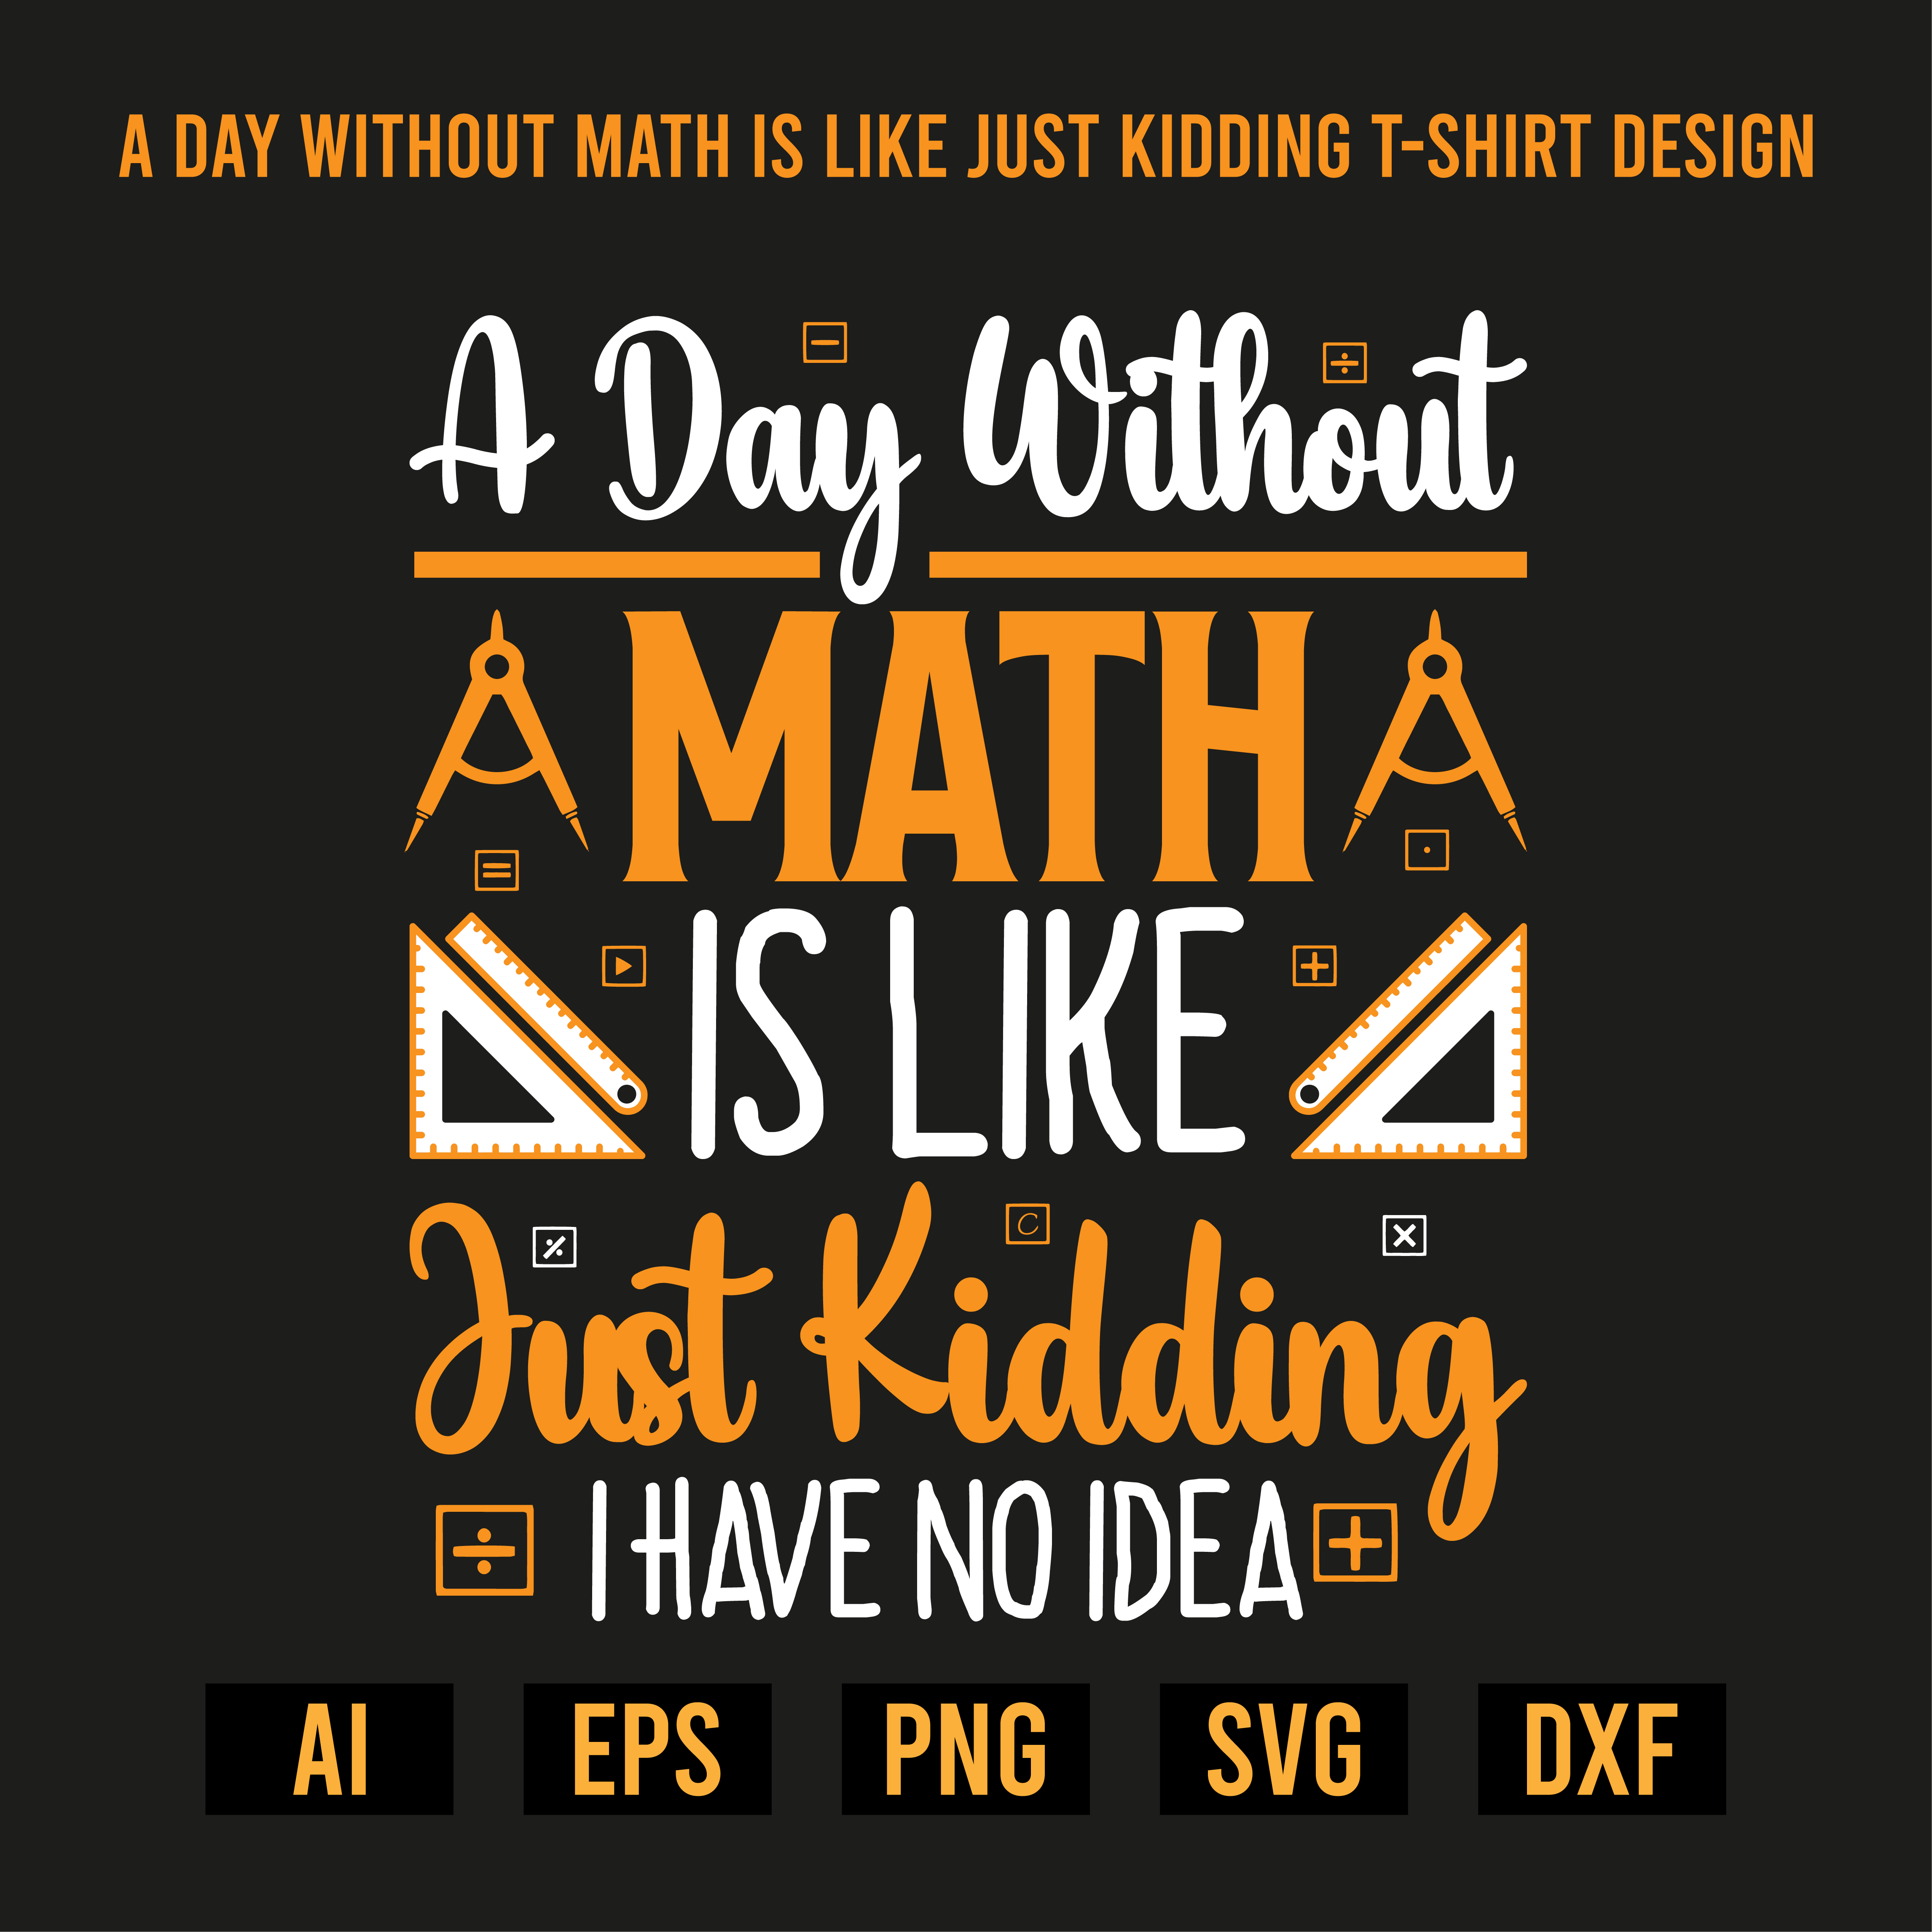 A Day Without Math T-Shirt Design cover.